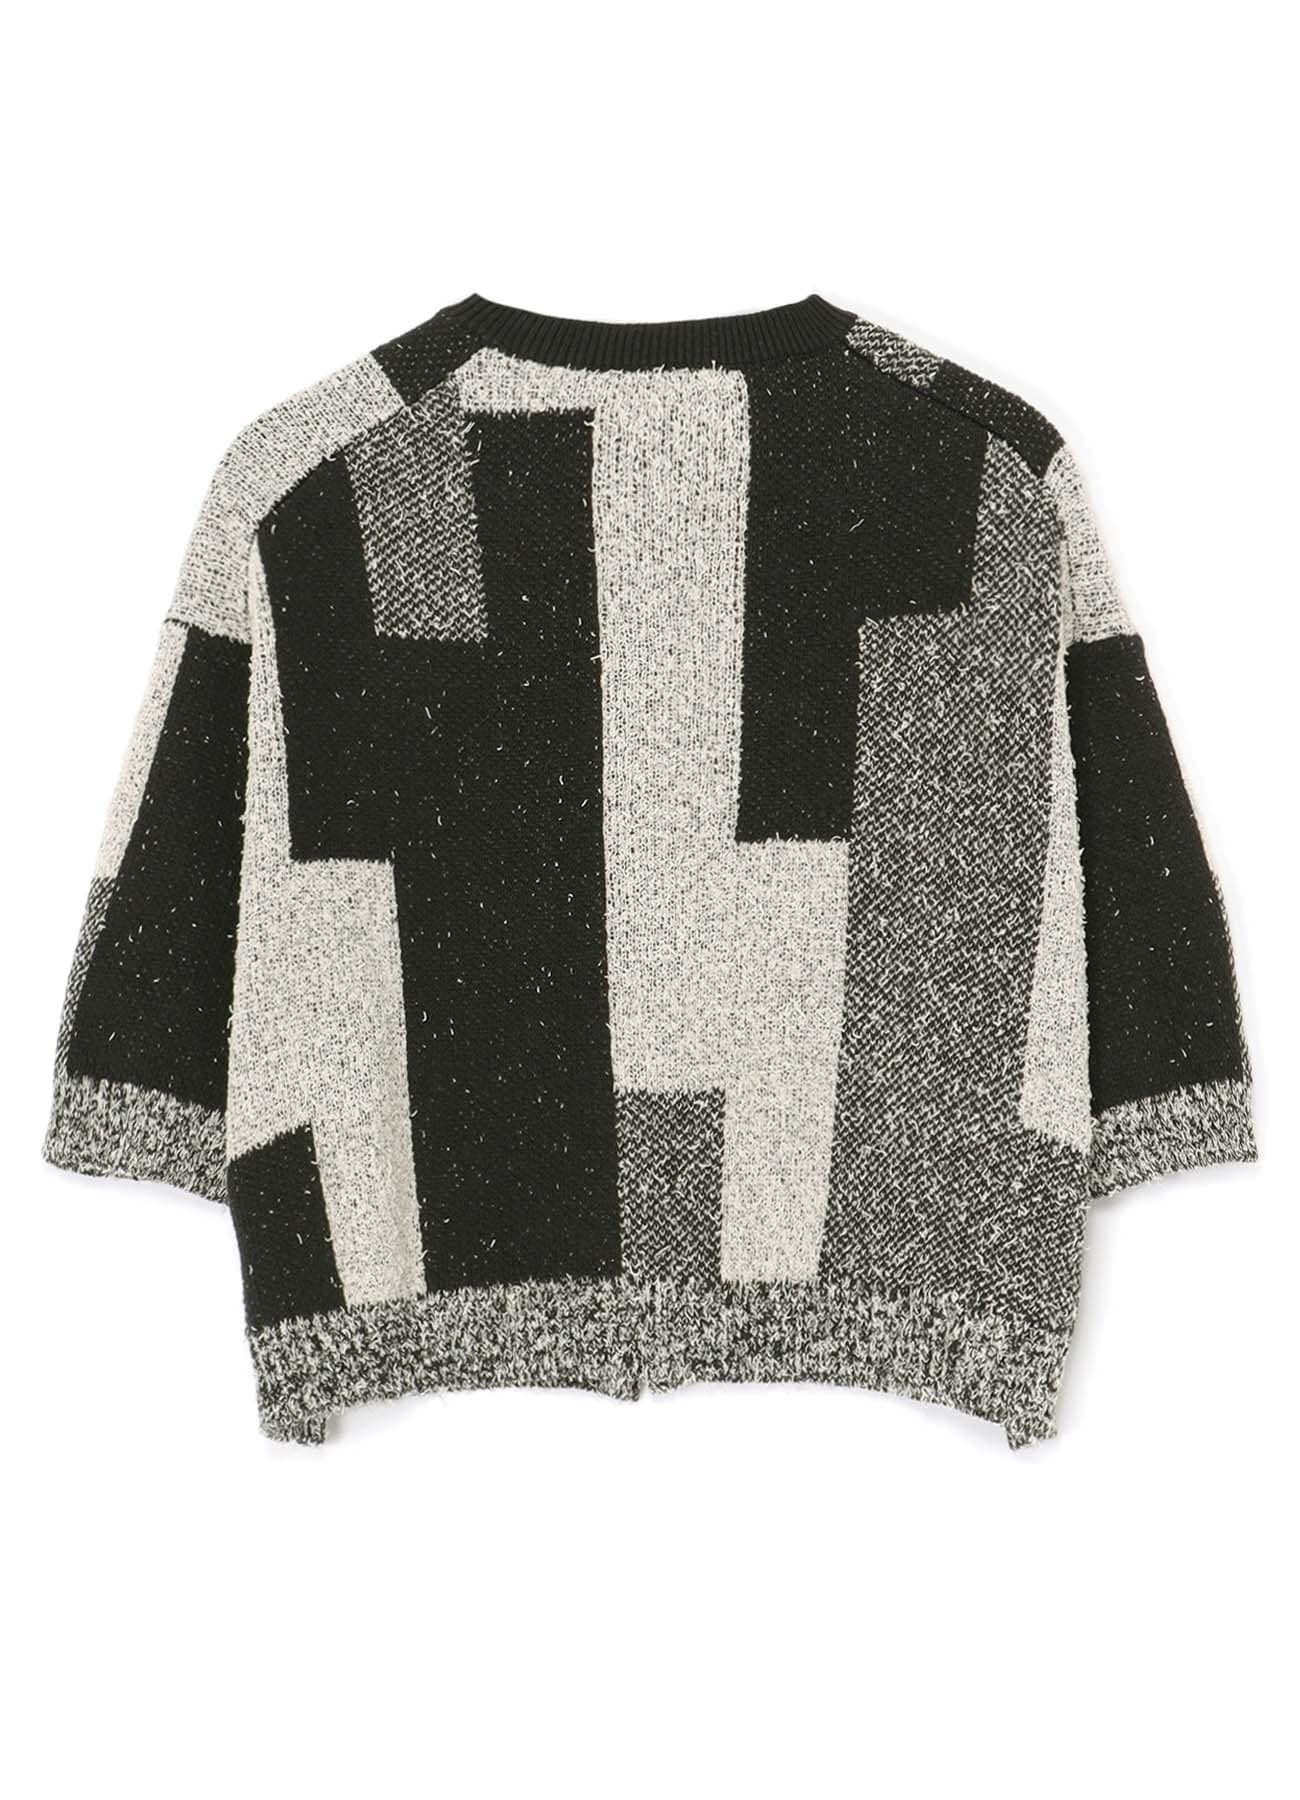 BLOCK CAMO JACQUARD LONG SLEEVE KNIT PULLOVER(S Black): Y's｜THE